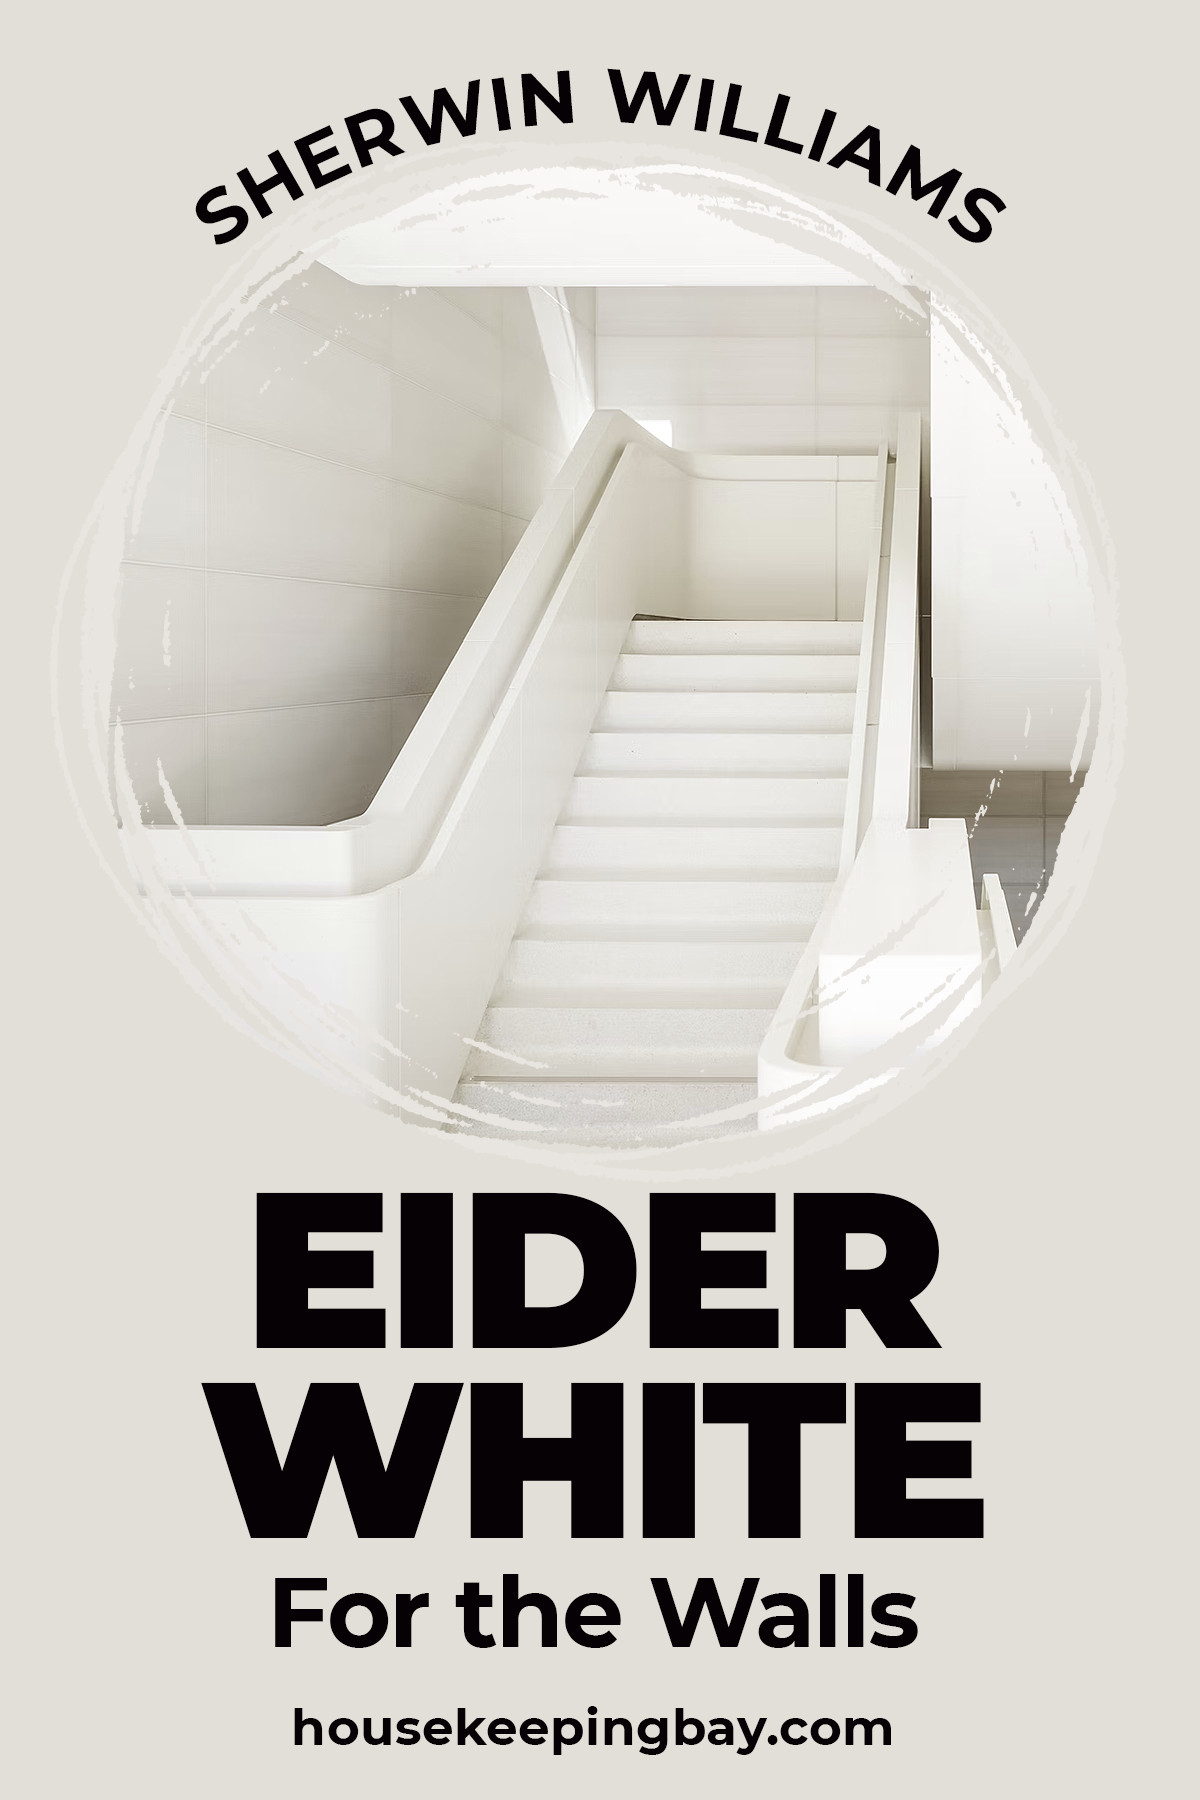 Sherwin Williams Eider White For the Walls